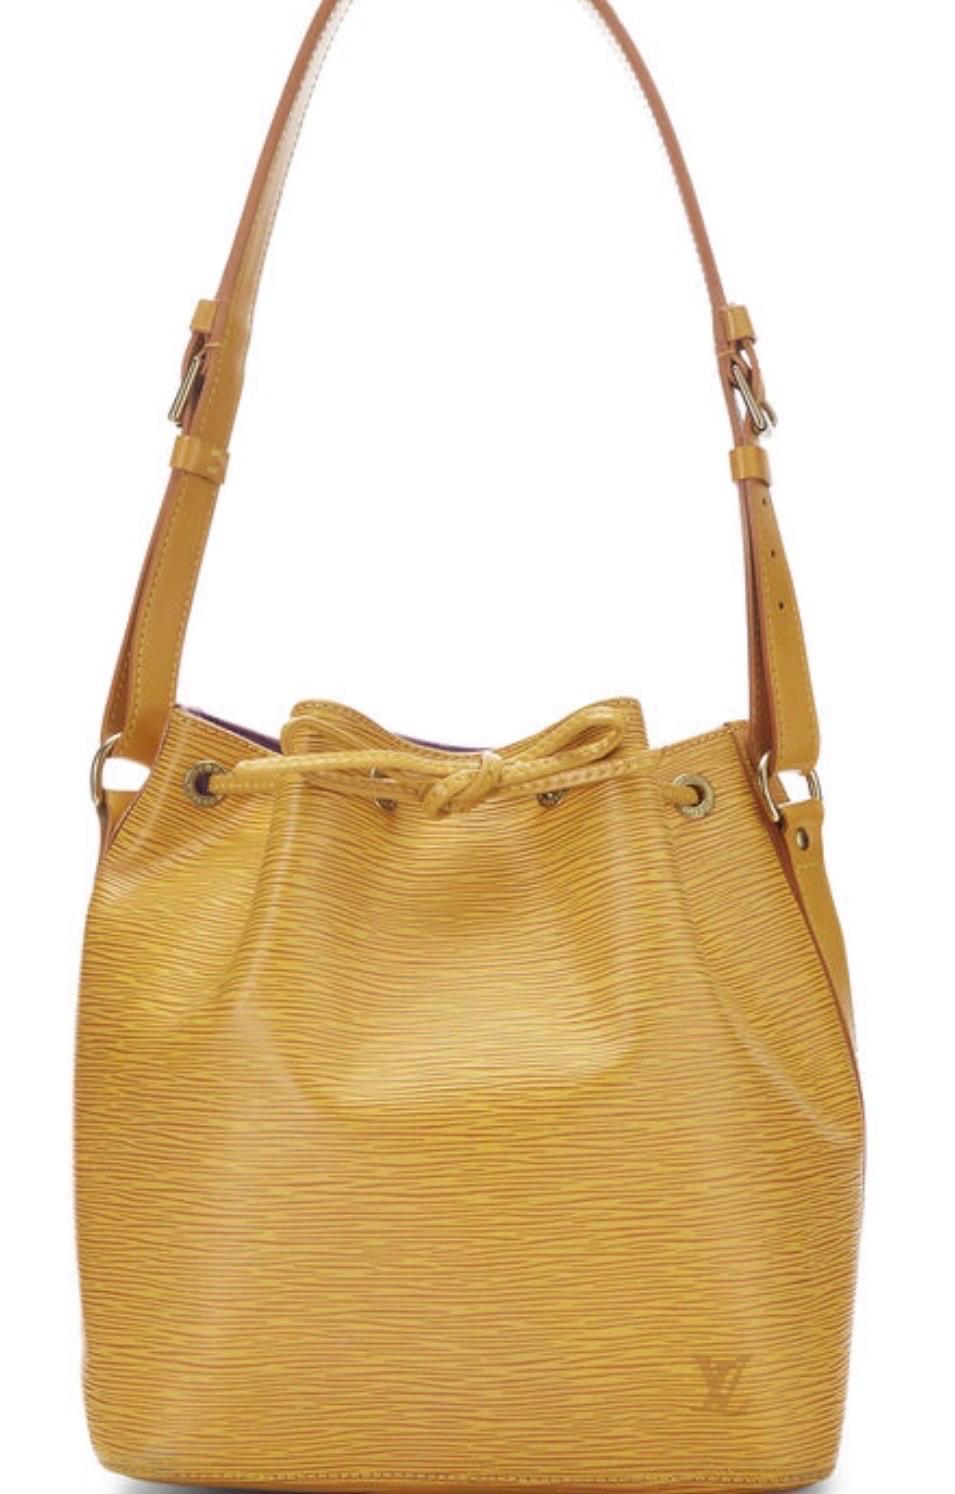 LOUIS VUITTON TASSIL YELLOW EPI NOÉ PETITE Drawstring Hand Bag/ Shoulder Bag In Good Condition For Sale In New York, NY